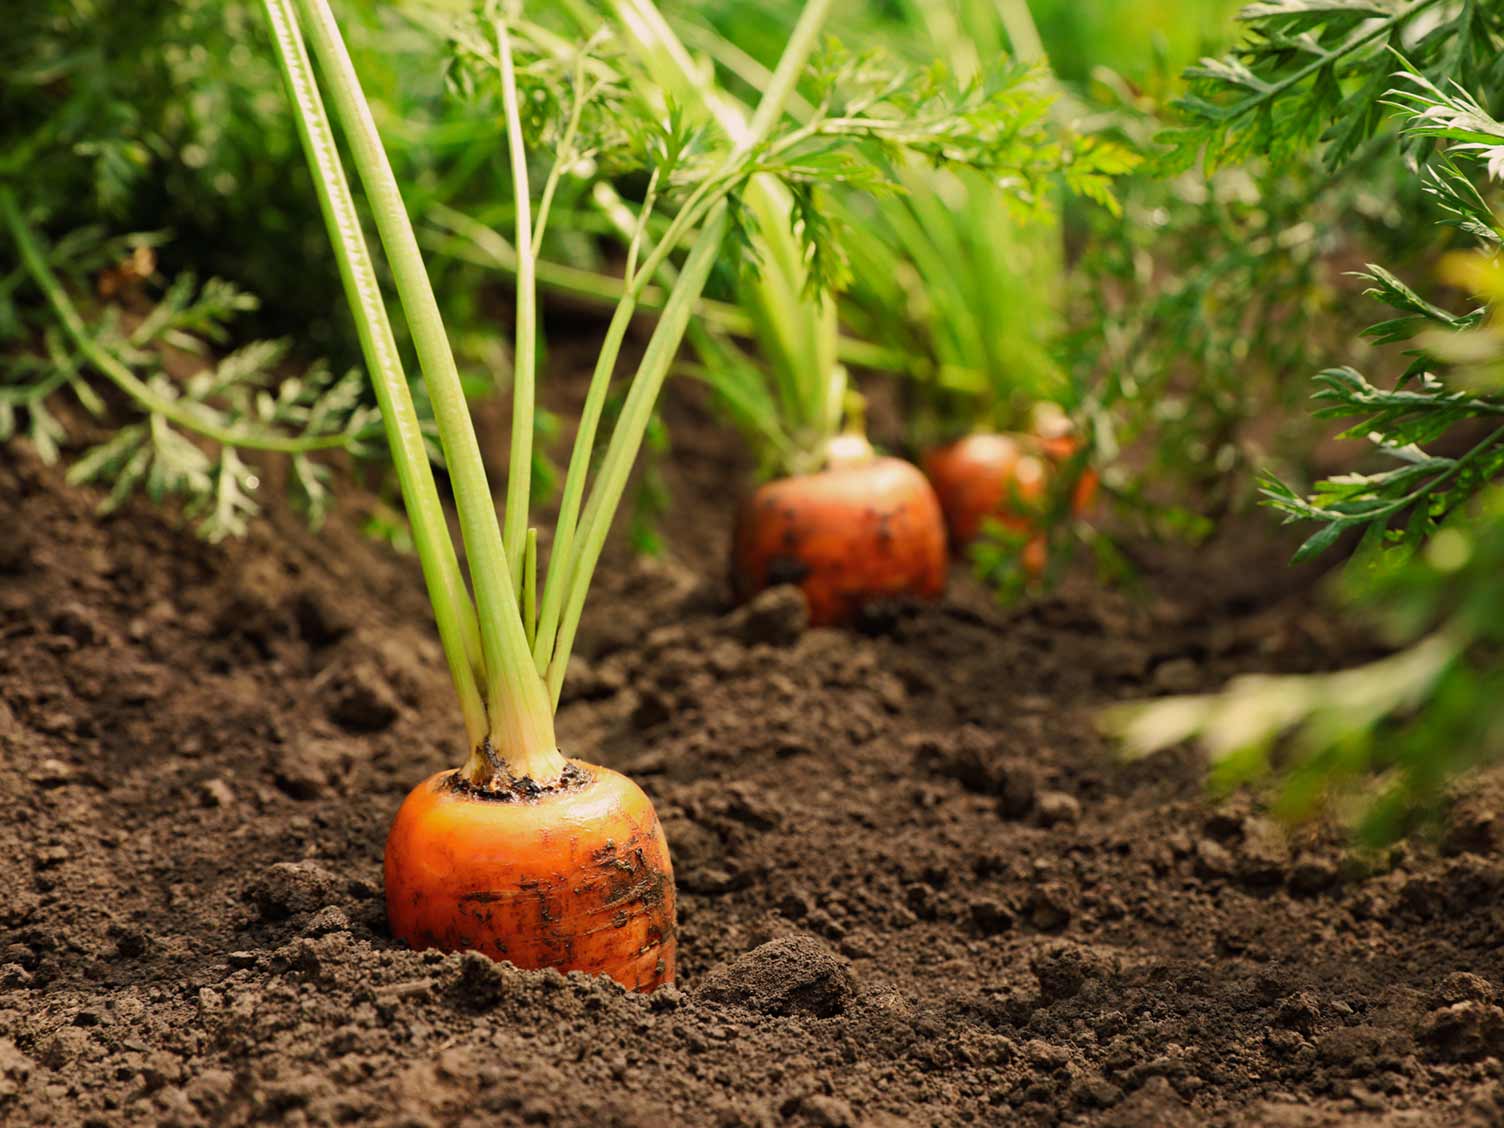 Carrots growing in the ground by farmers in the UK united kingdom.